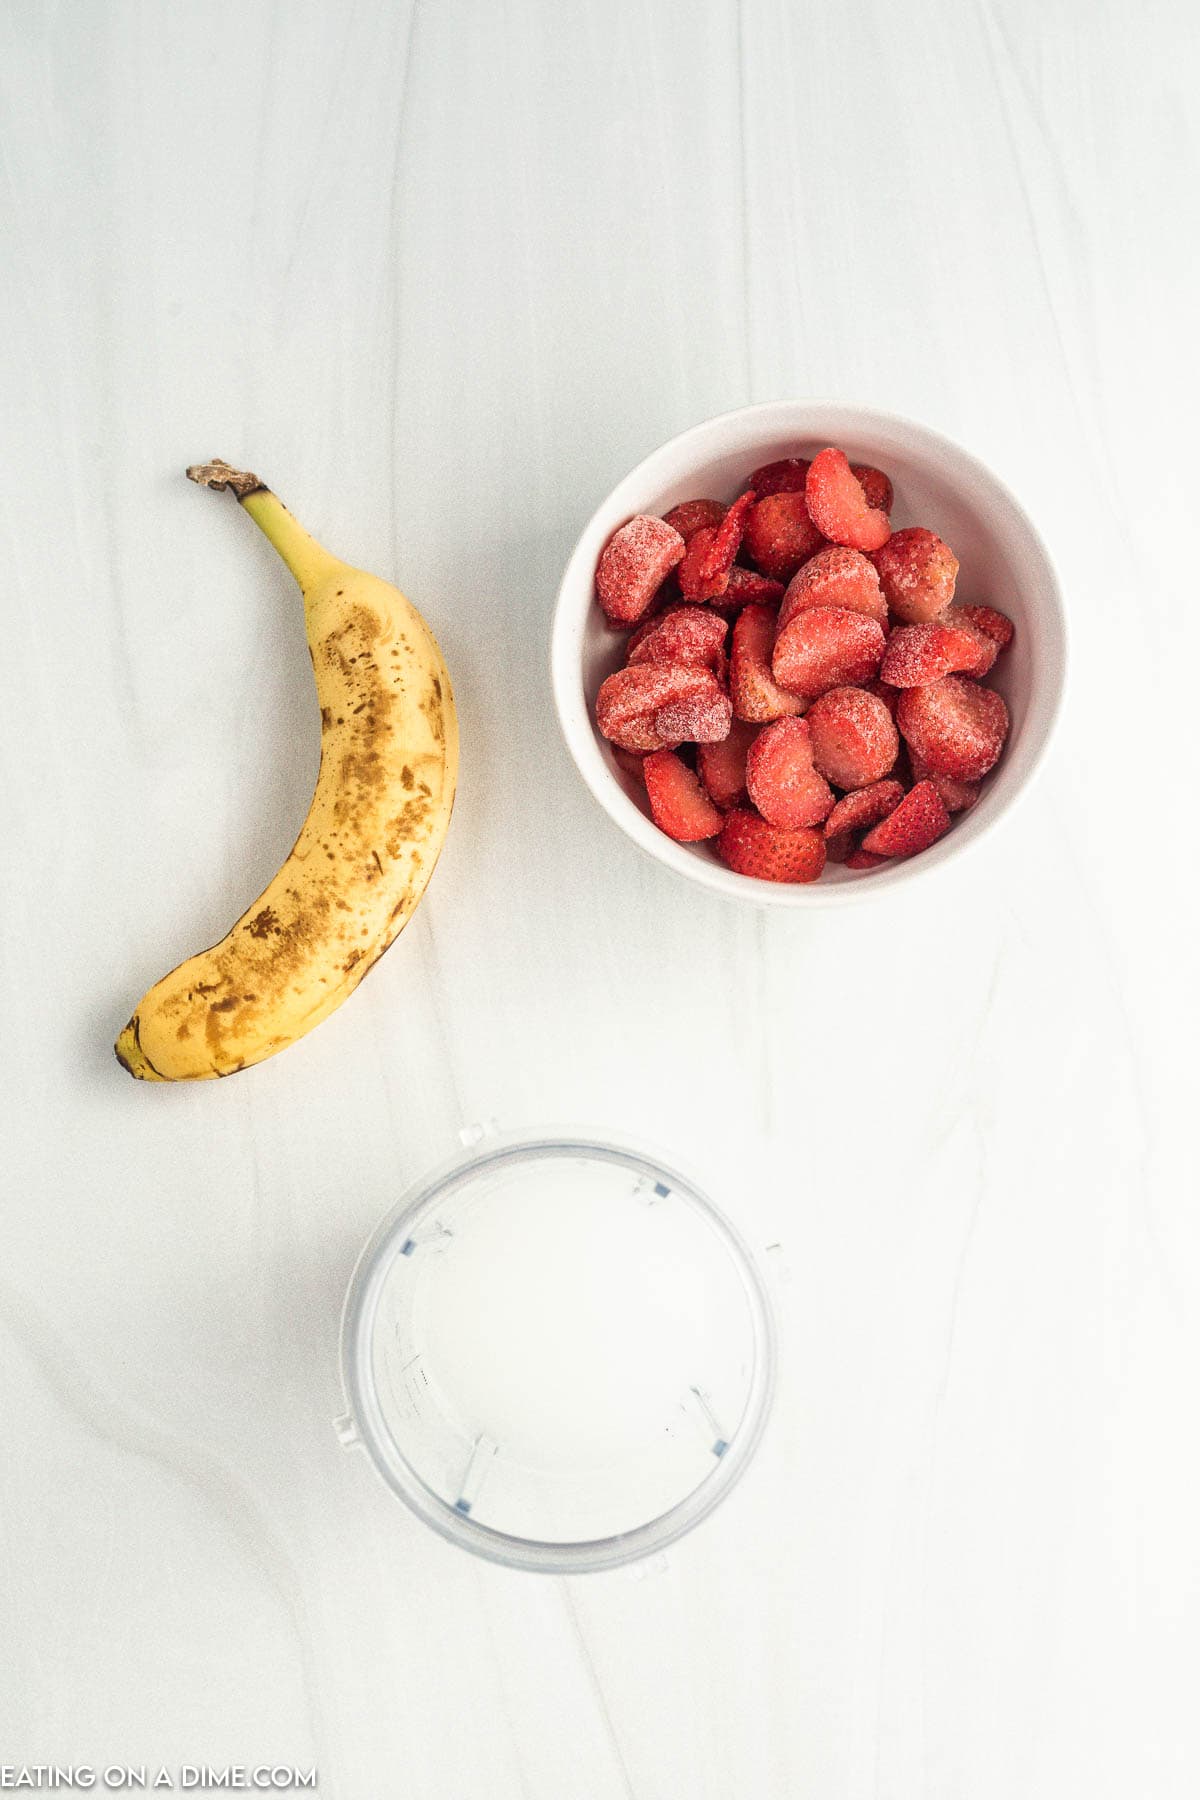 Placing milk in the blender cup with a bowl of frozen strawberries and a banana